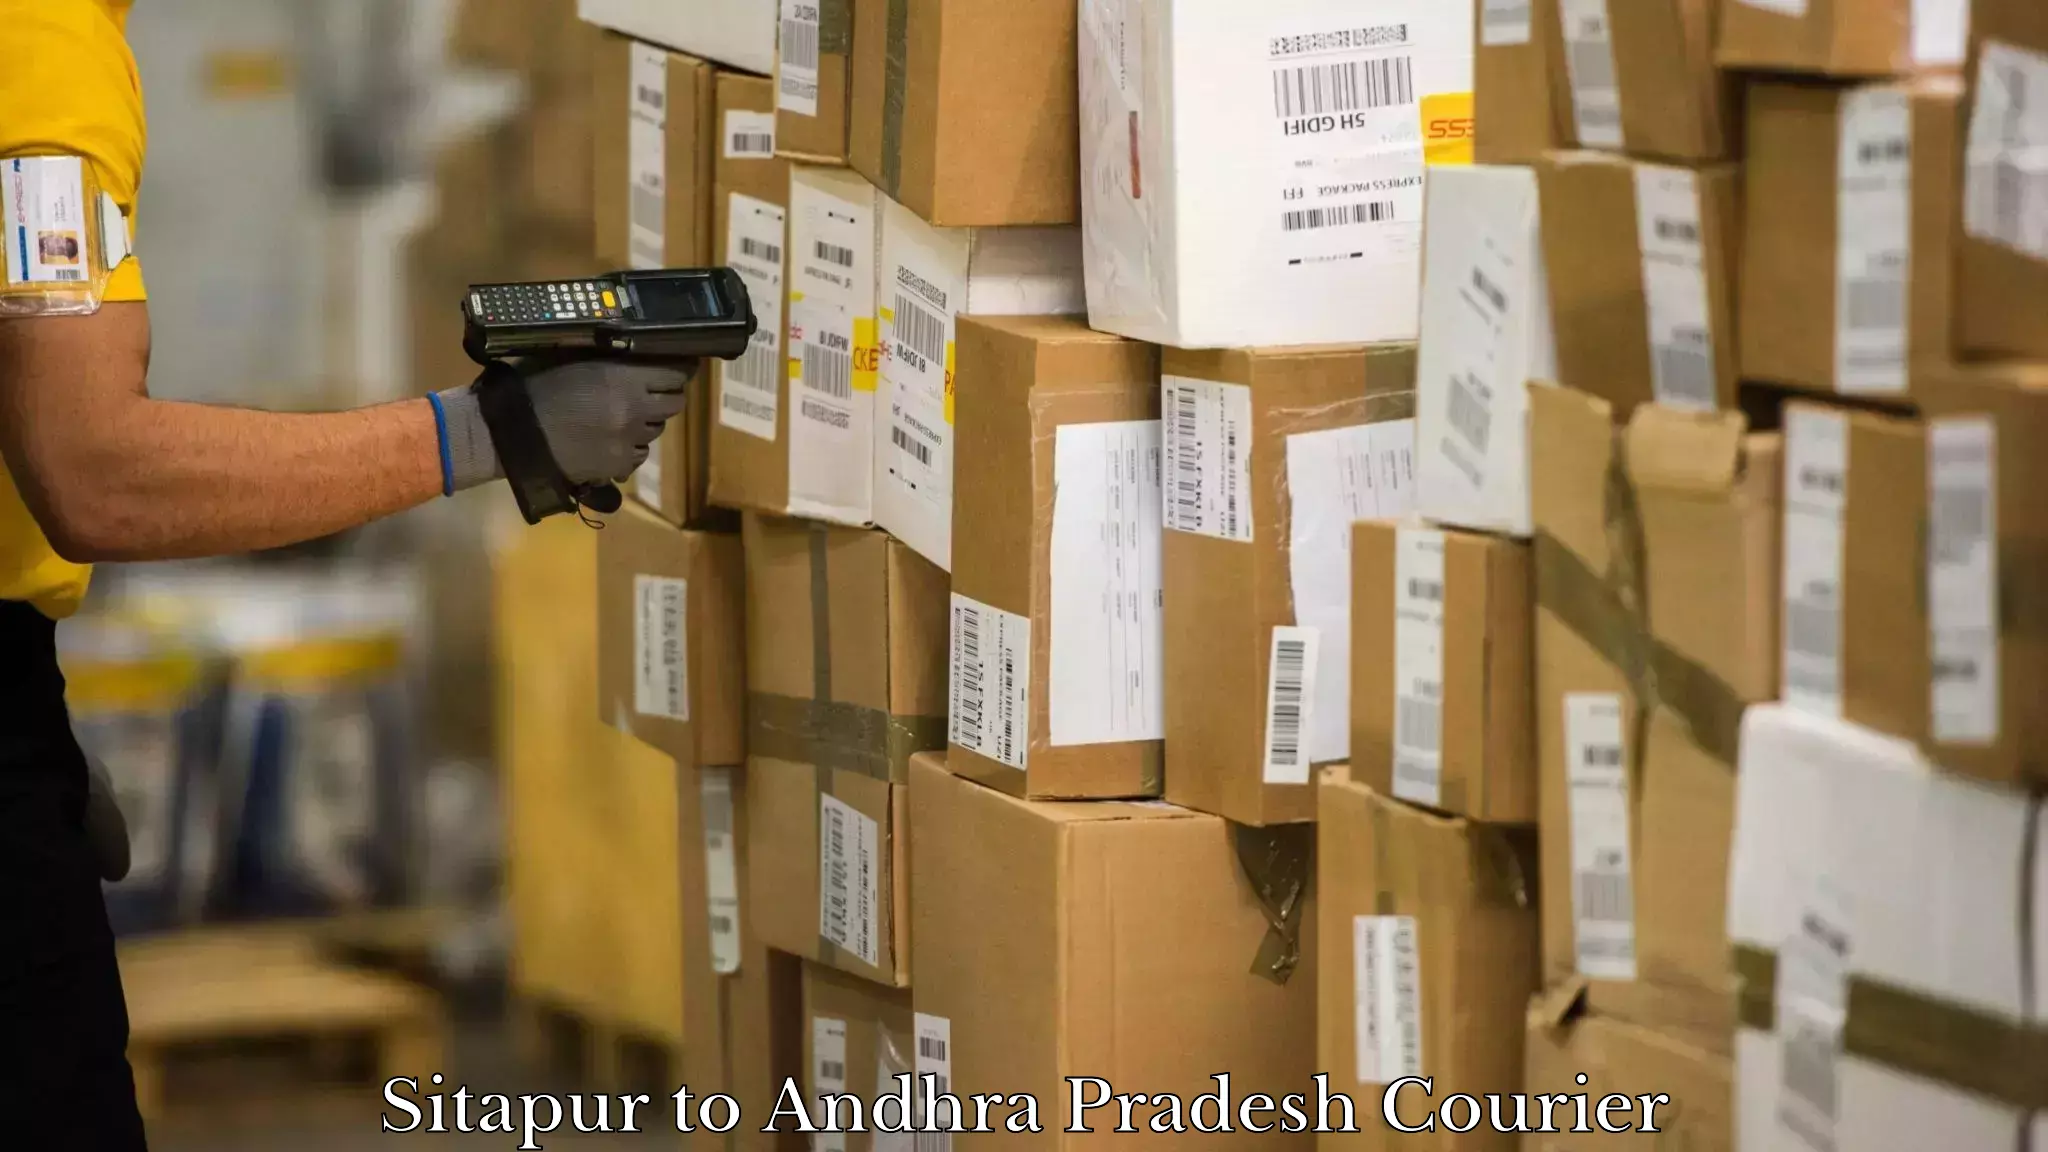 State-of-the-art courier technology Sitapur to Andhra Pradesh